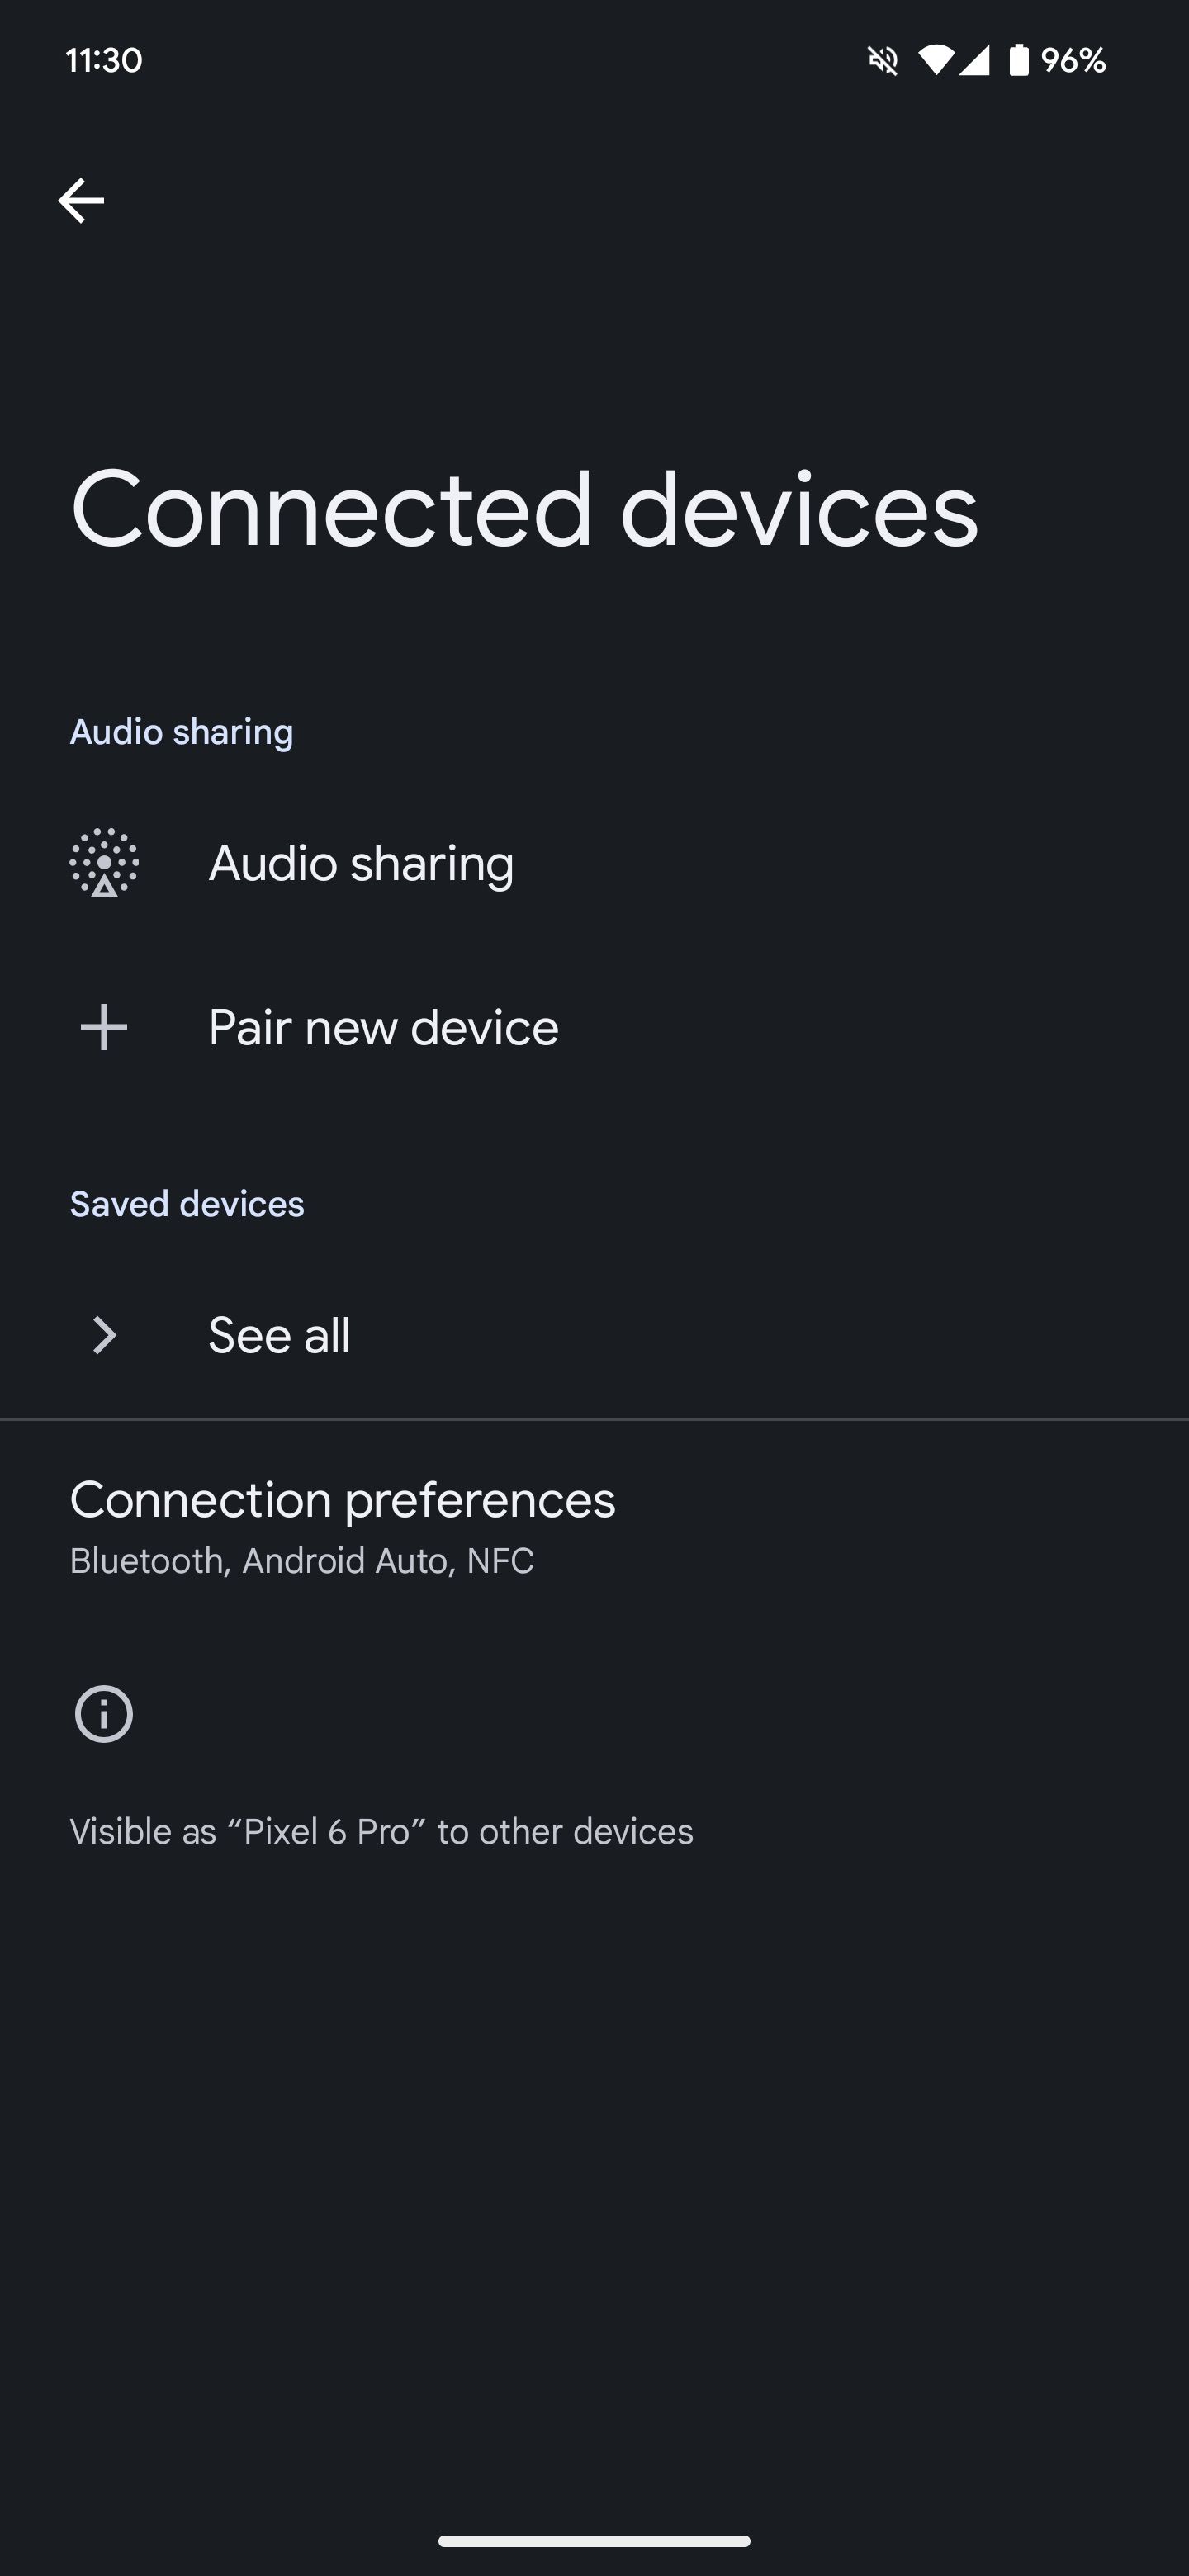 Connected devices in Android 15 DP2